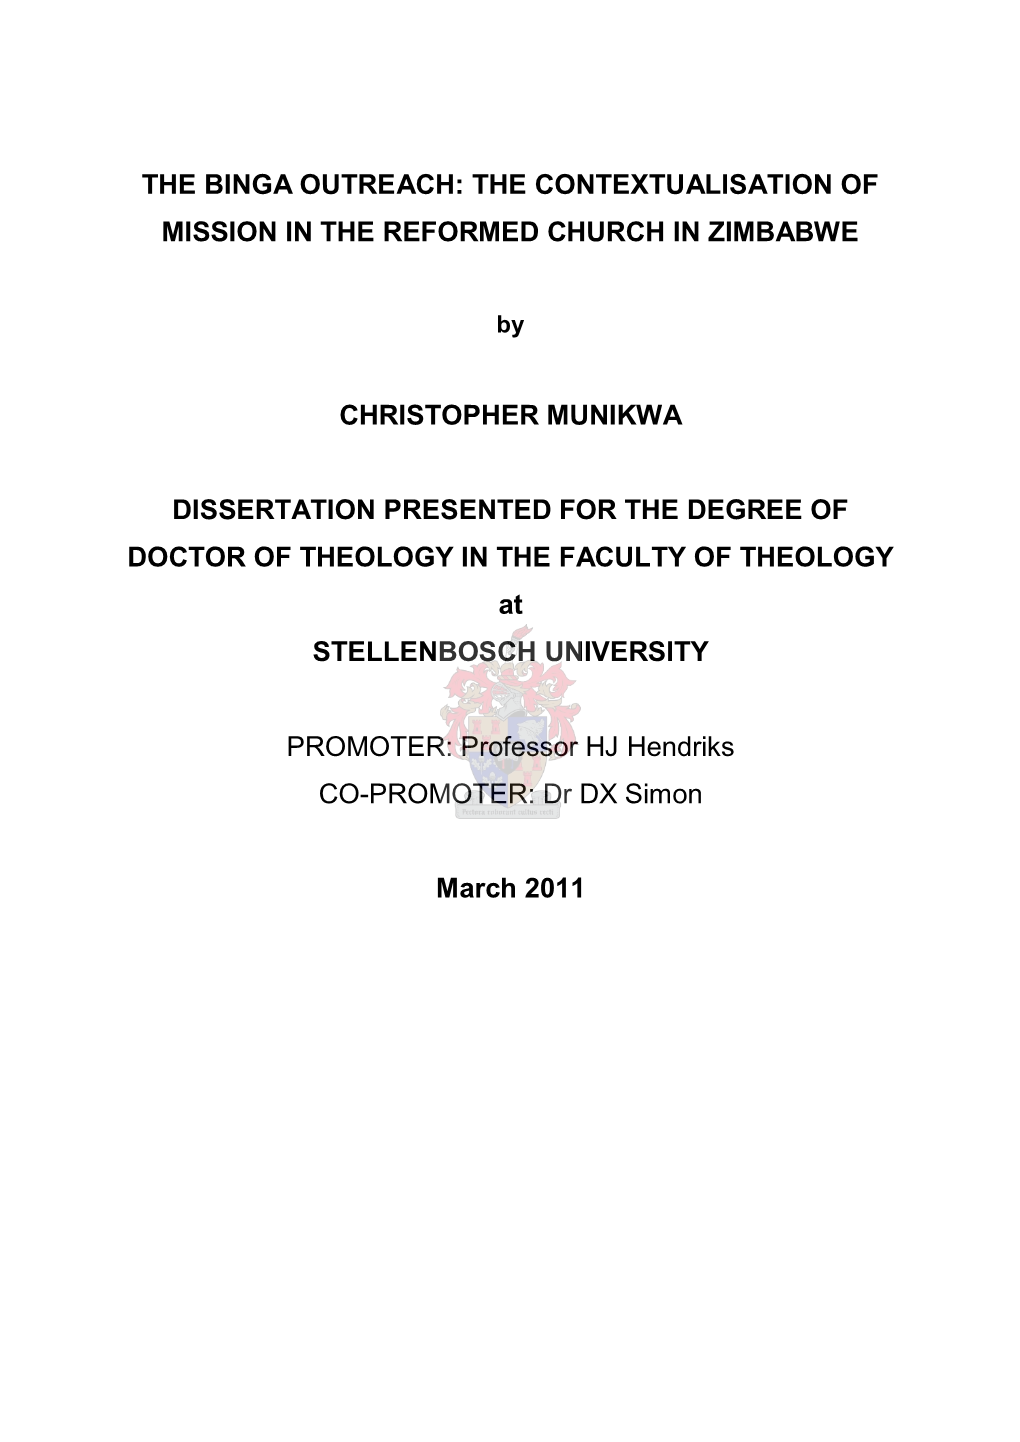 The Contextualisation of Mission in the Reformed Church in Zimbabwe